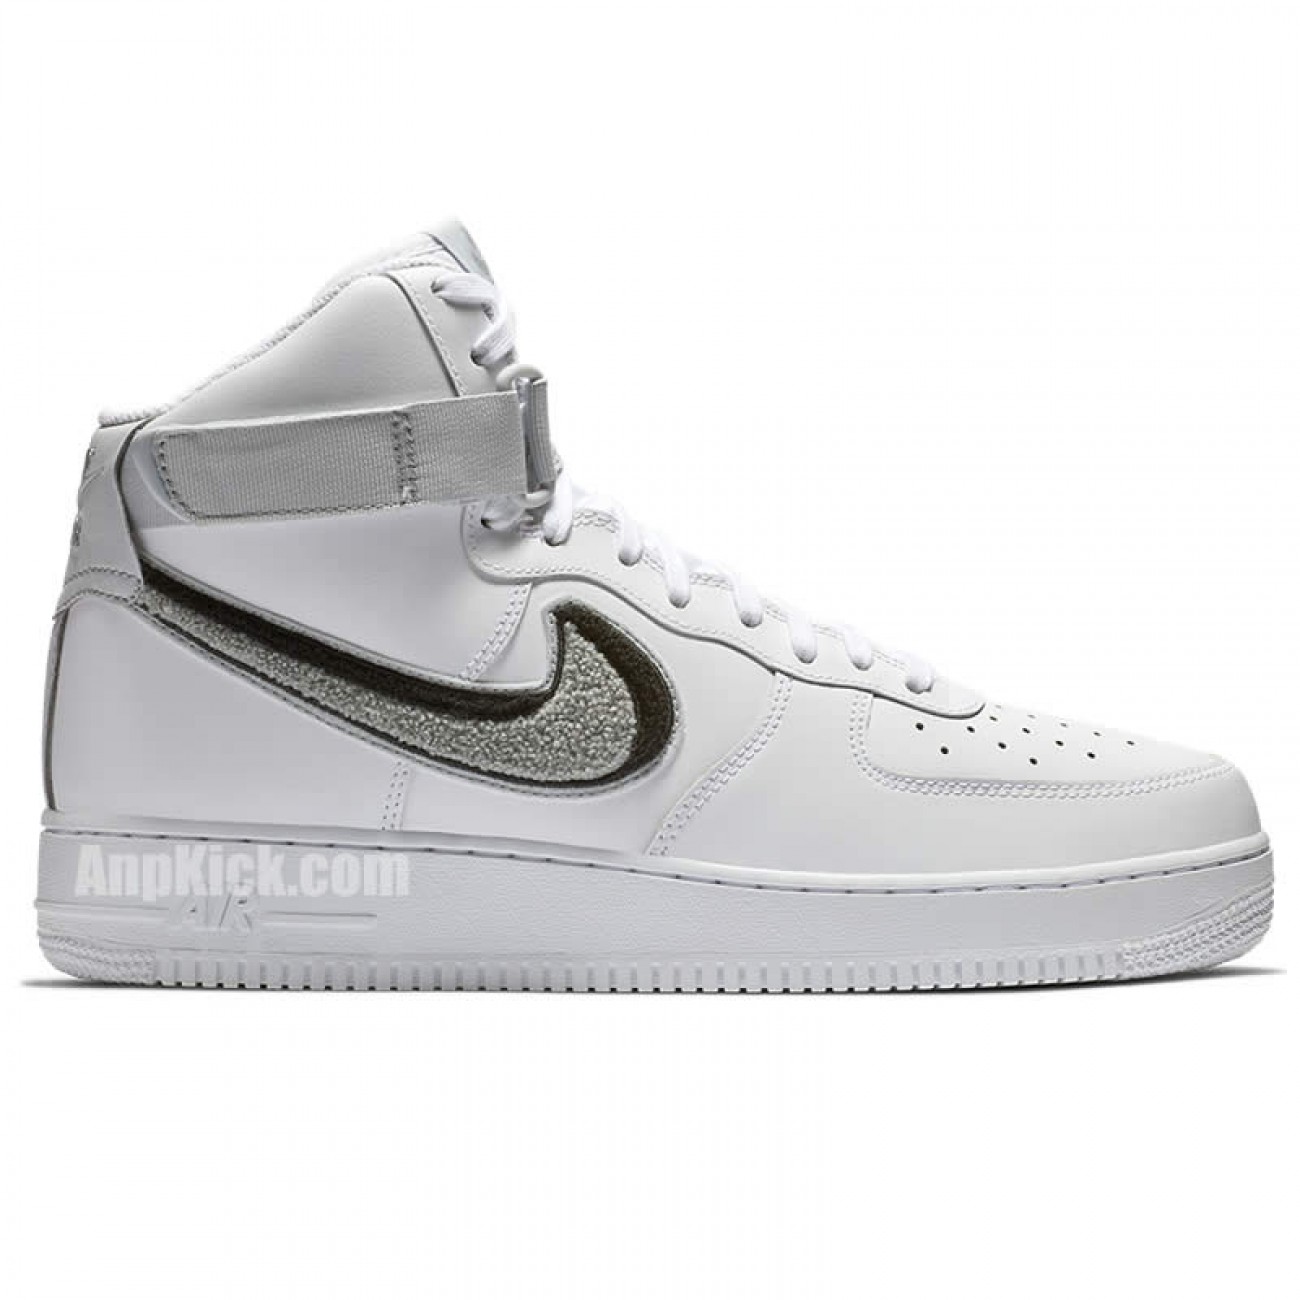 White Air Forces 1 07 LV8 High Top "Chenille Swoosh" Nike Outlet 806403-105